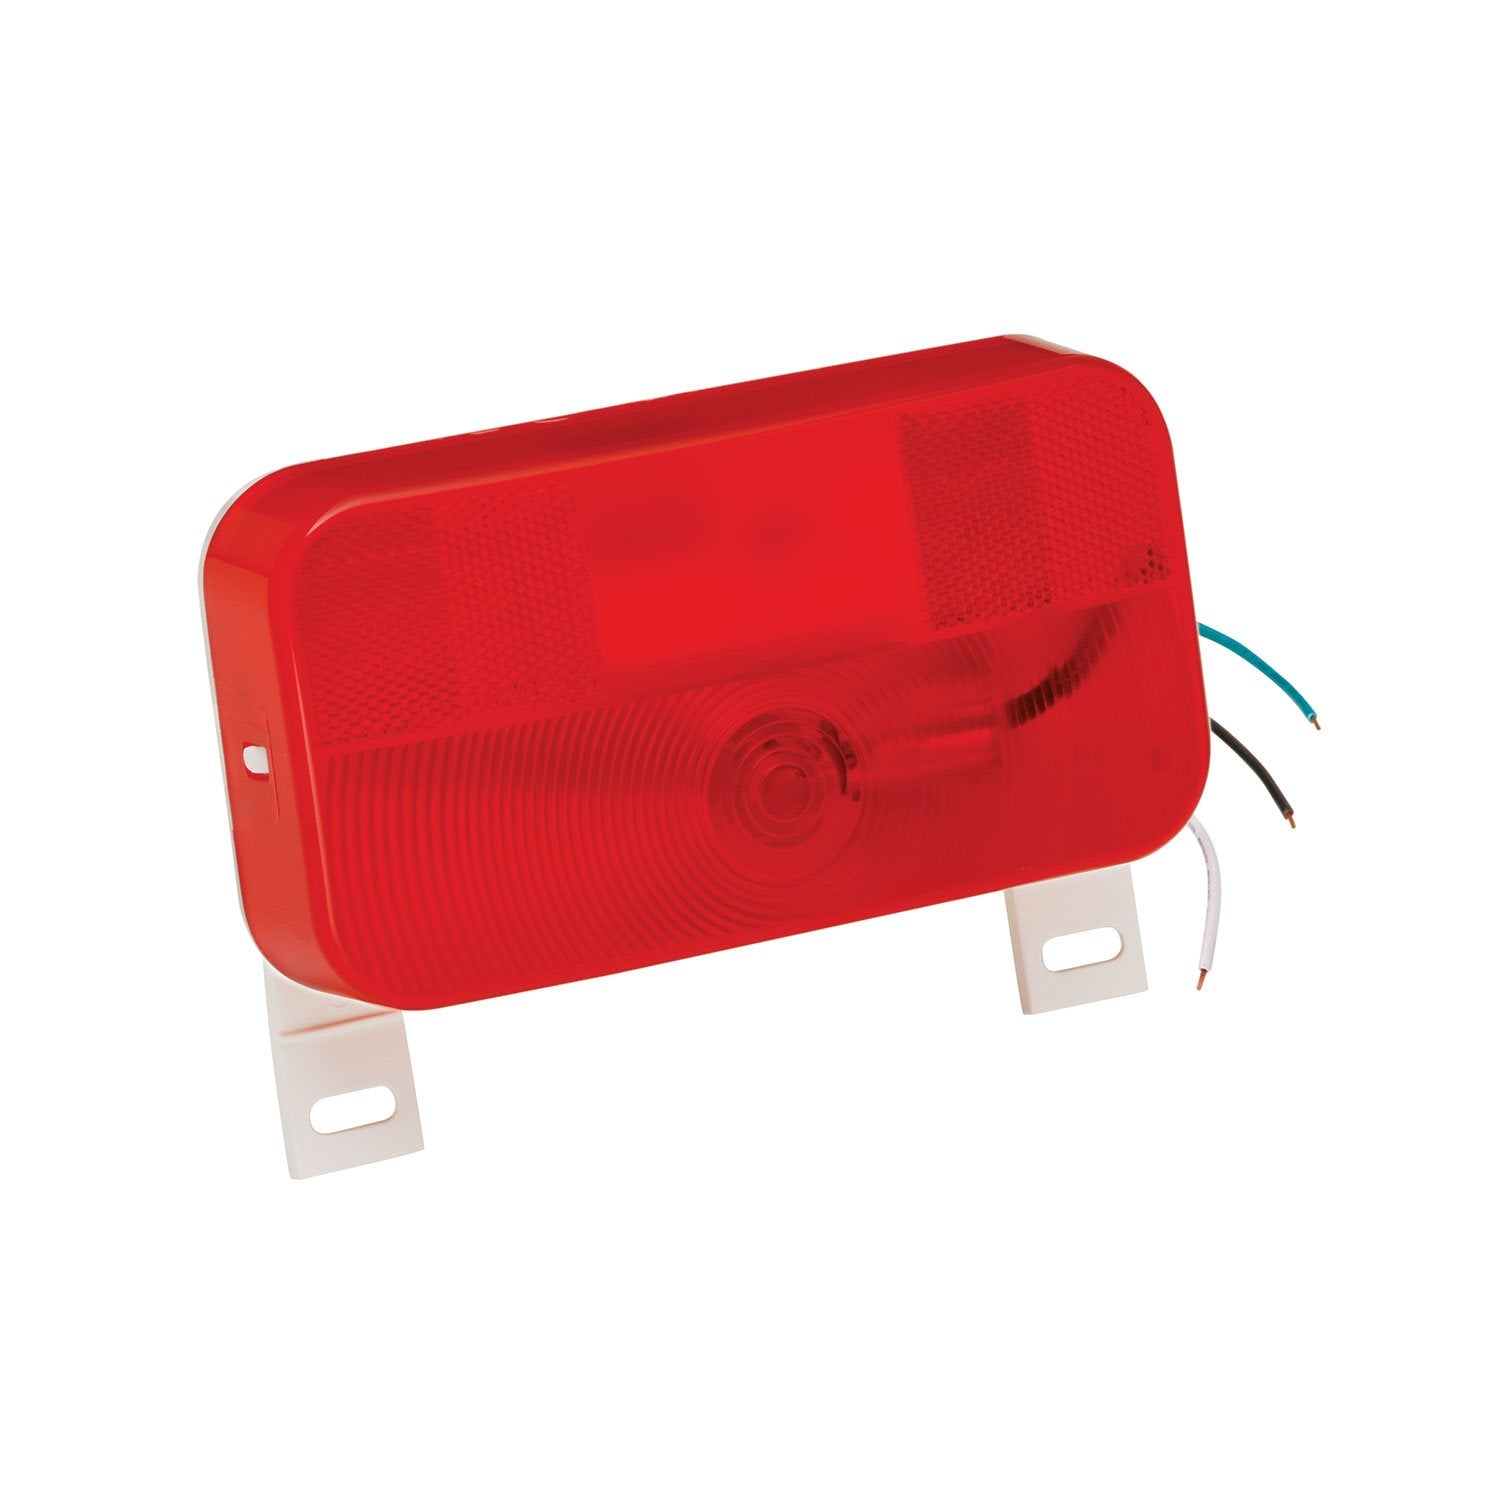 Bargman 31-92-003 Mount Stop/Tail/Turn Light (Surface with License Light and Bracket - White Base)